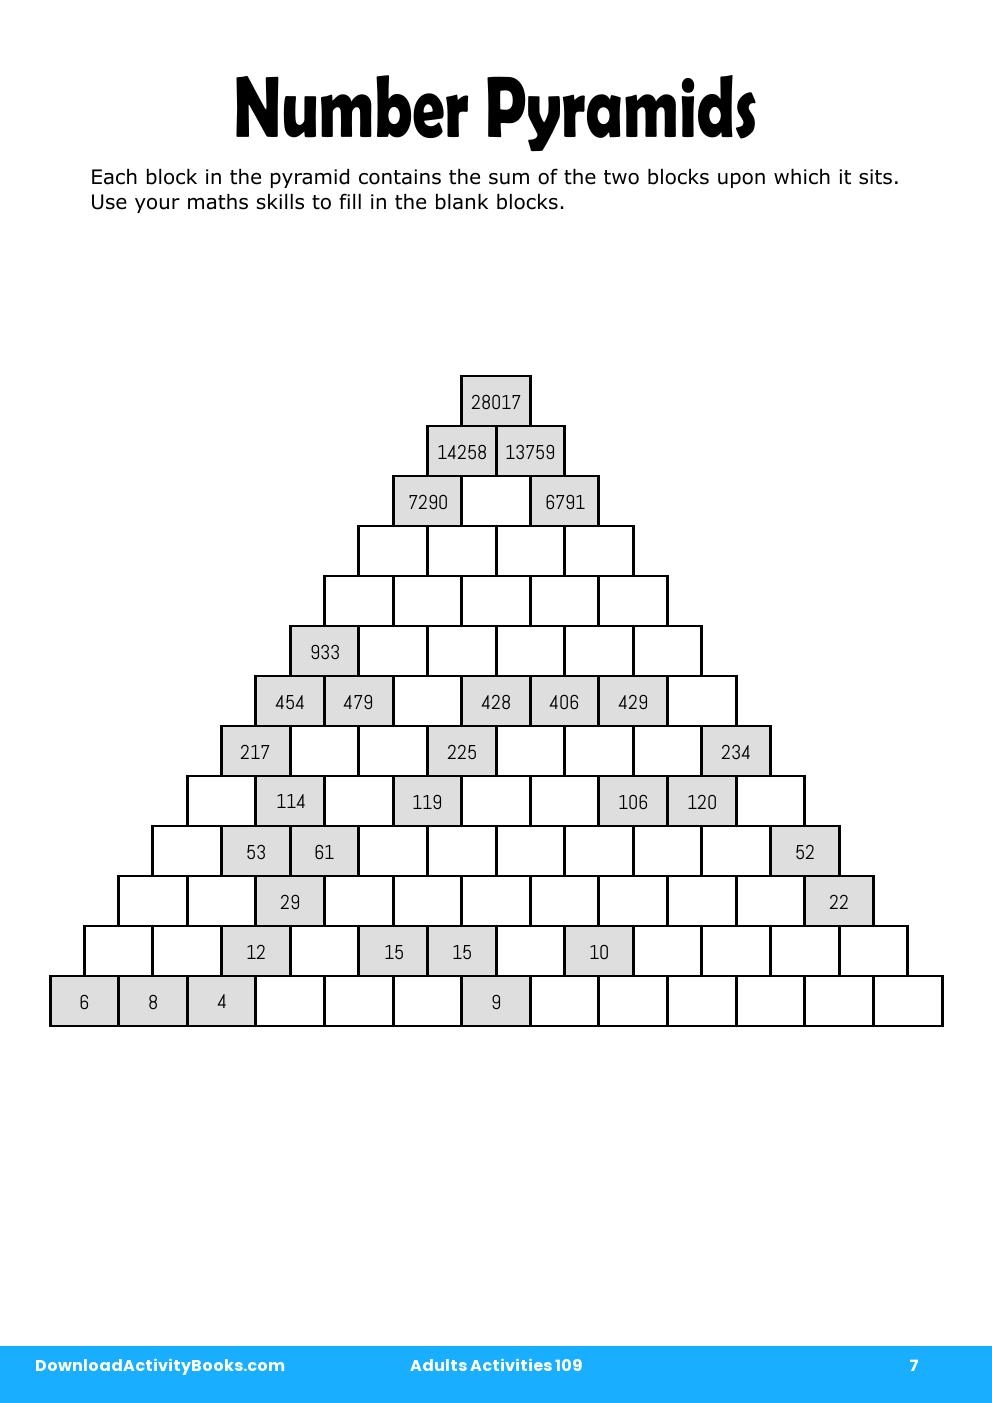 Number Pyramids in Adults Activities 109